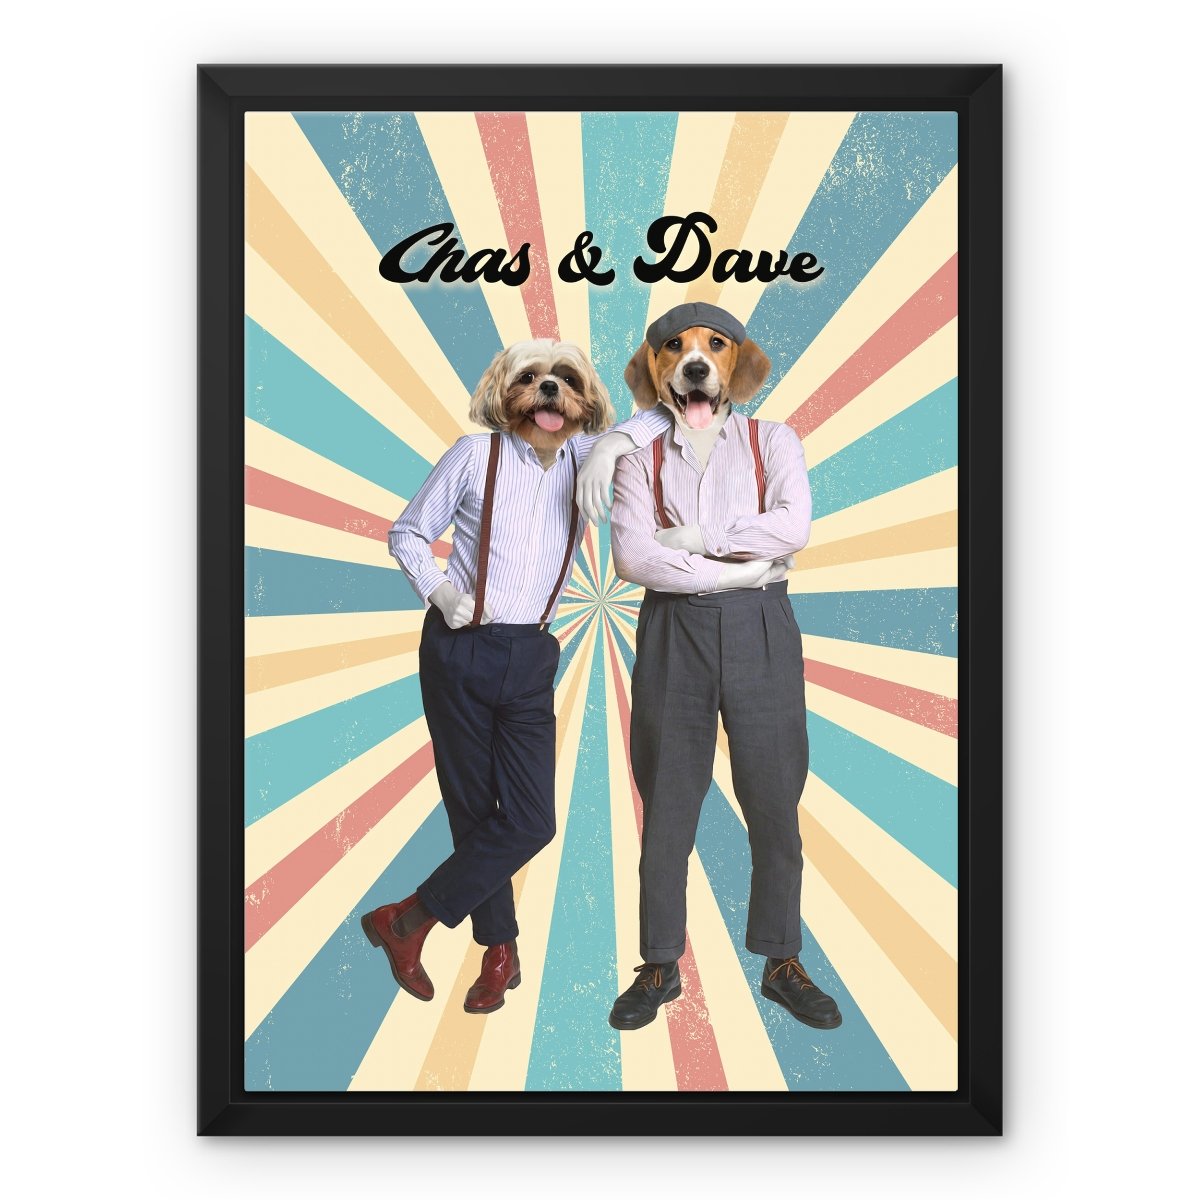 Chas & Dave: Custom Pet Canvas - Paw & Glory - #pet portraits# - #dog portraits# - #pet portraits uk#pawandglory, pet art canvas,custom pet canvas uk, pet canvas portrait, custom dog canvas, personalised cat canvas, canvas dog carrier